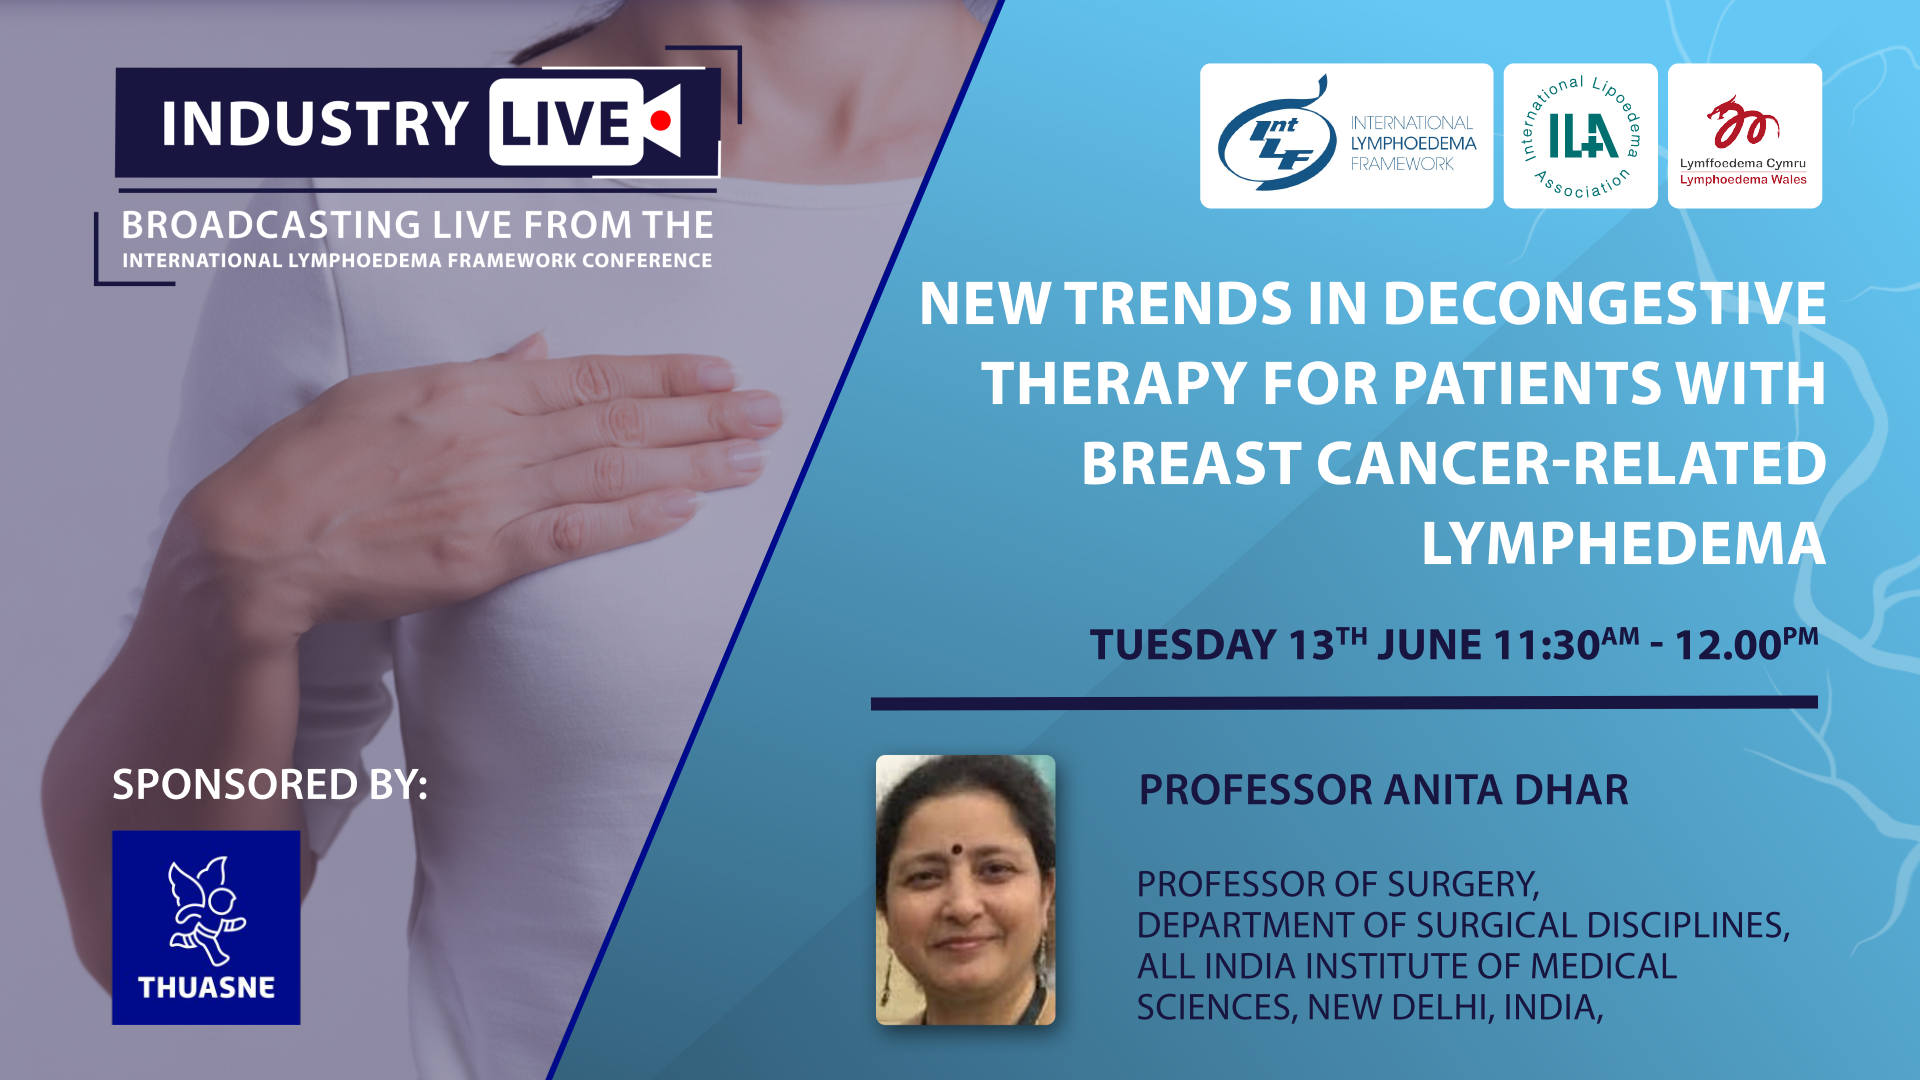 New trends in decongestive therapy for patients with breast cancer-related lymphedema